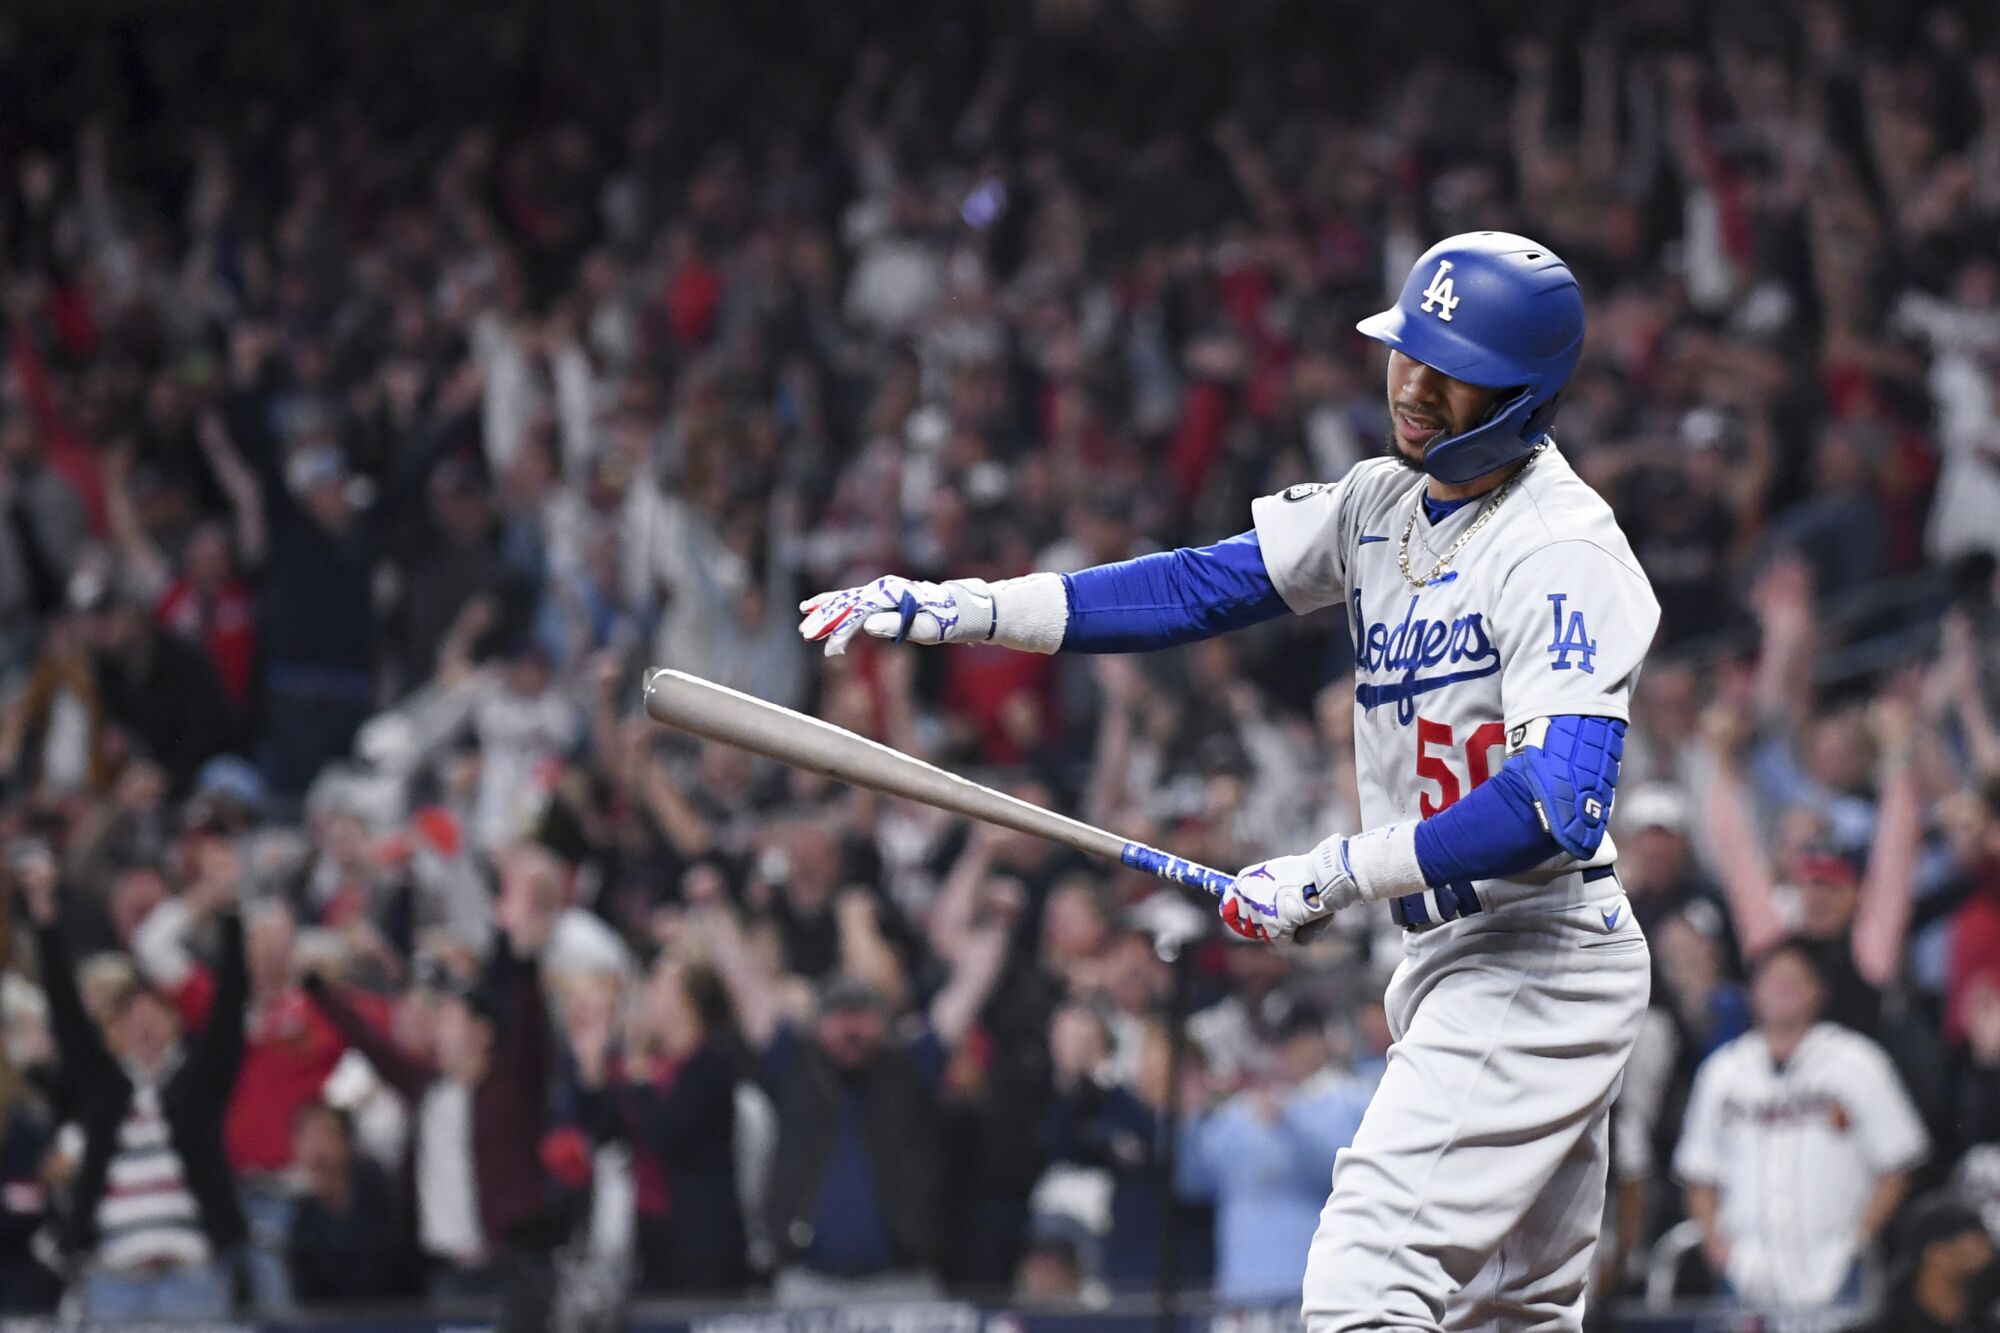 Dodgers right fielder Mookie Betts reacts after striking out during the seventh inning in Game 6 of the NLCS.